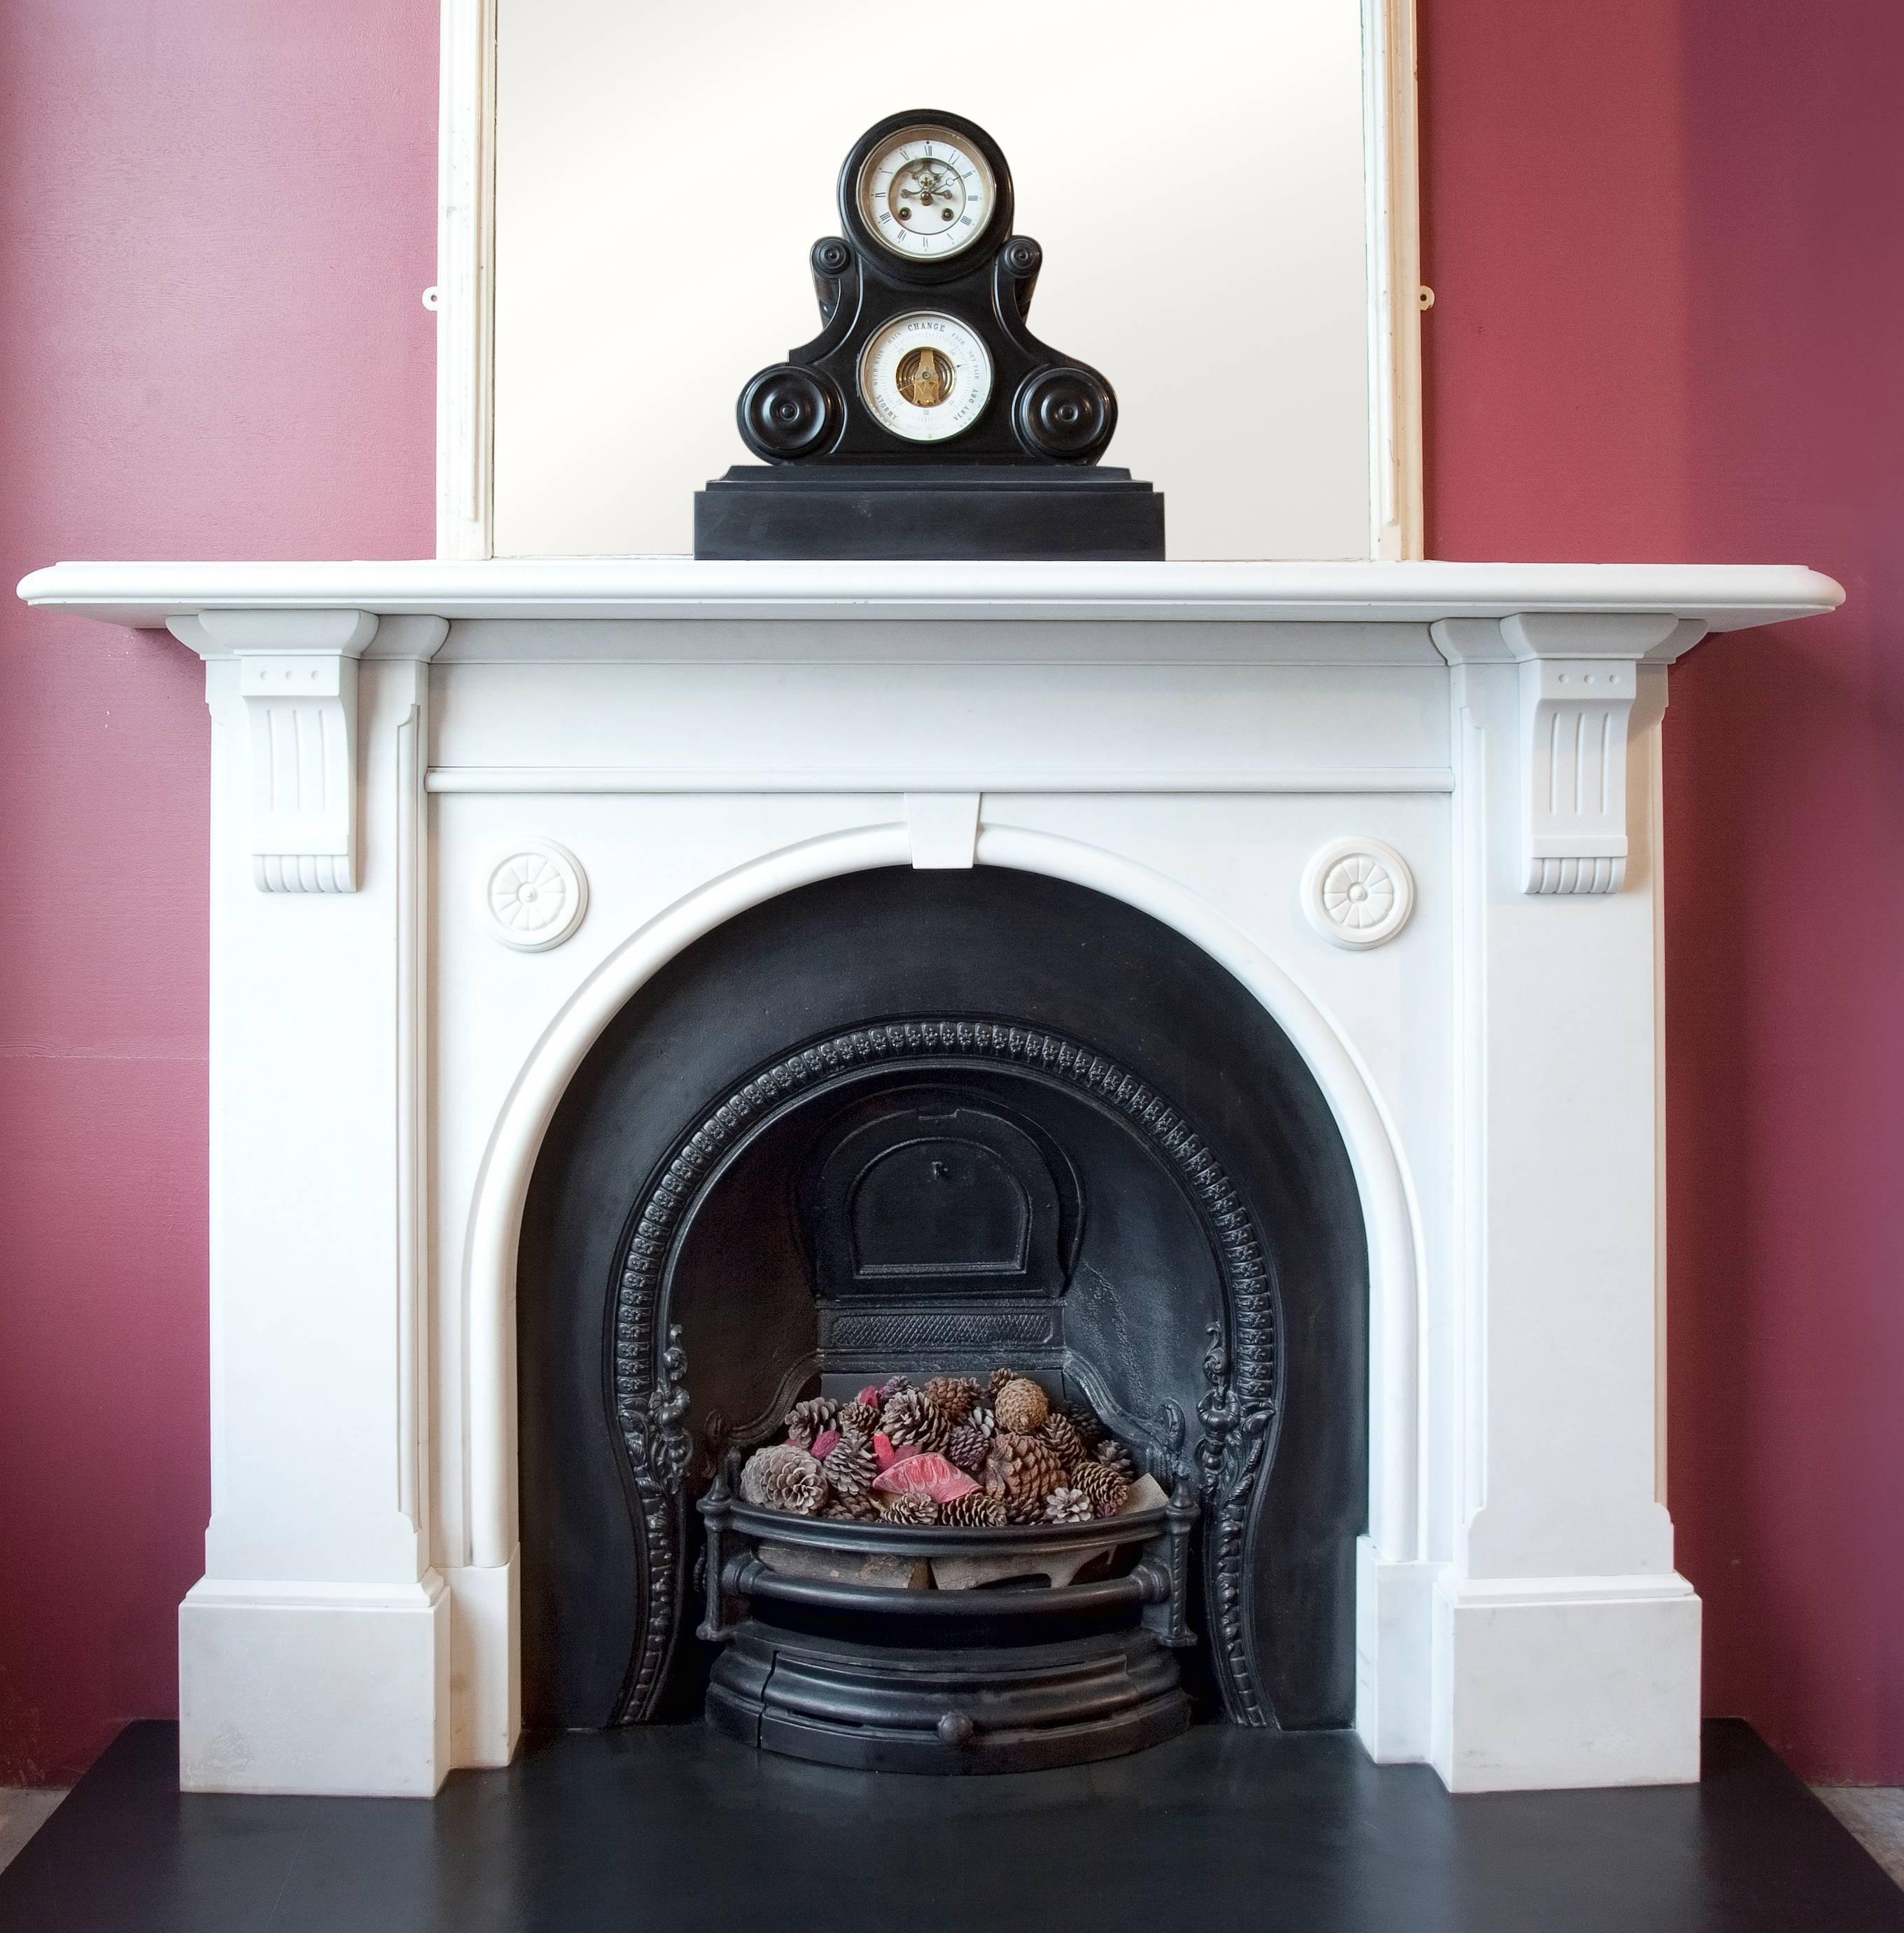 Antique 19th century Victorian statuary white marble fireplace surround with arched aperture.
The slate hearth, cast iron fire grate and accessories shown with the fireplace surround are not included in the price.

Aperture approximate